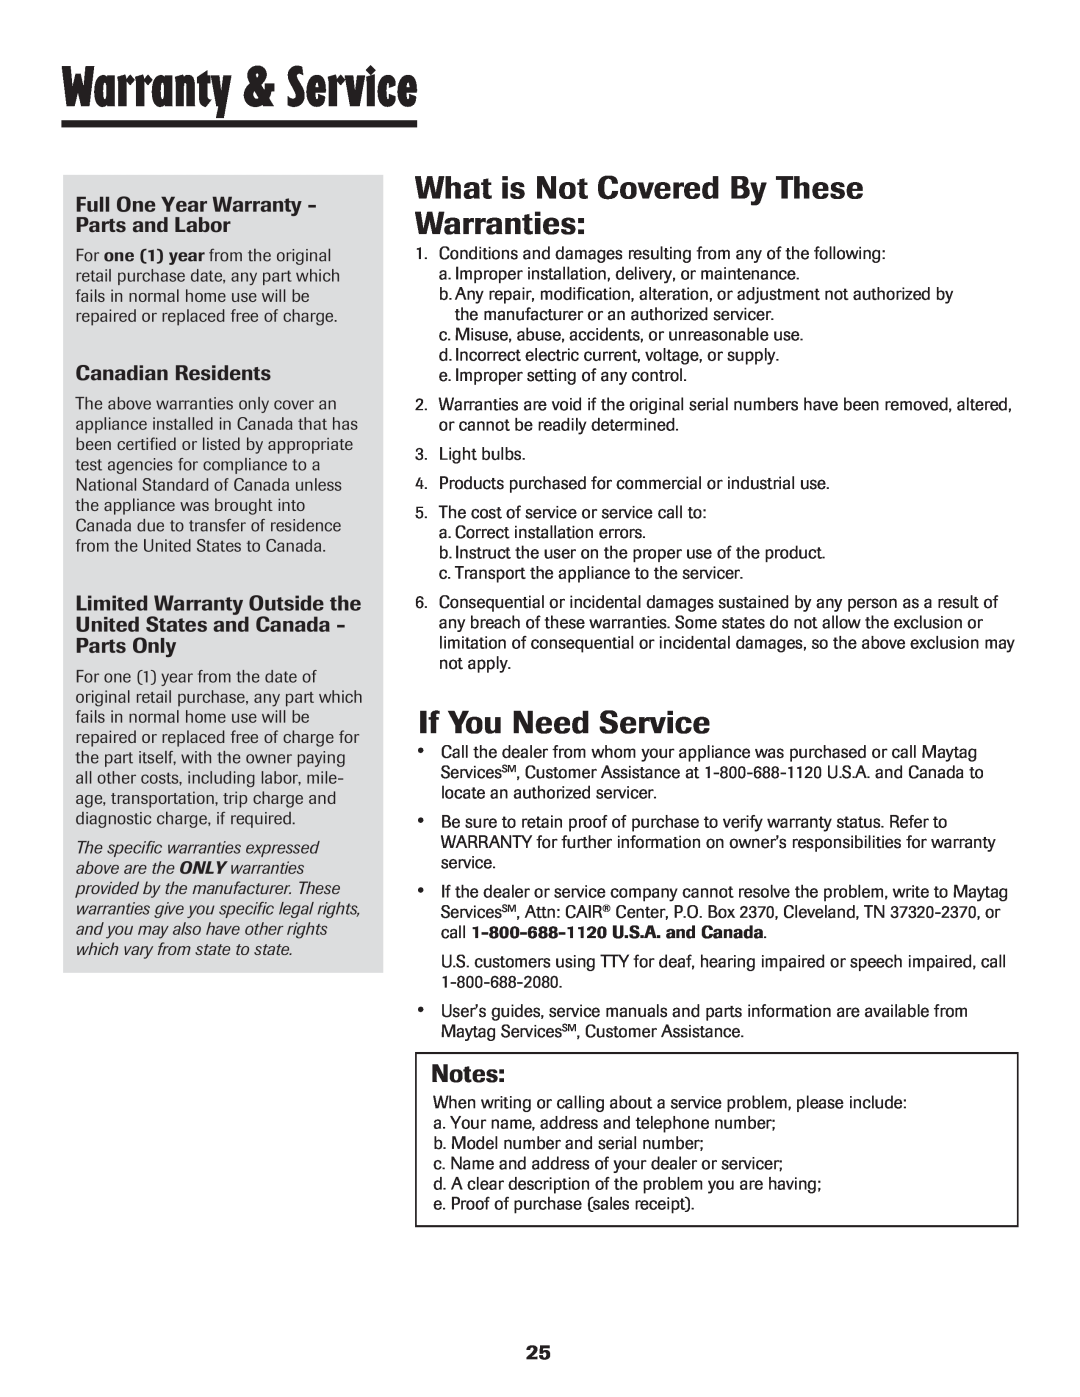 Maytag Oven Warranty & Service, What is Not Covered By These Warranties, If You Need Service, Canadian Residents, Notes 